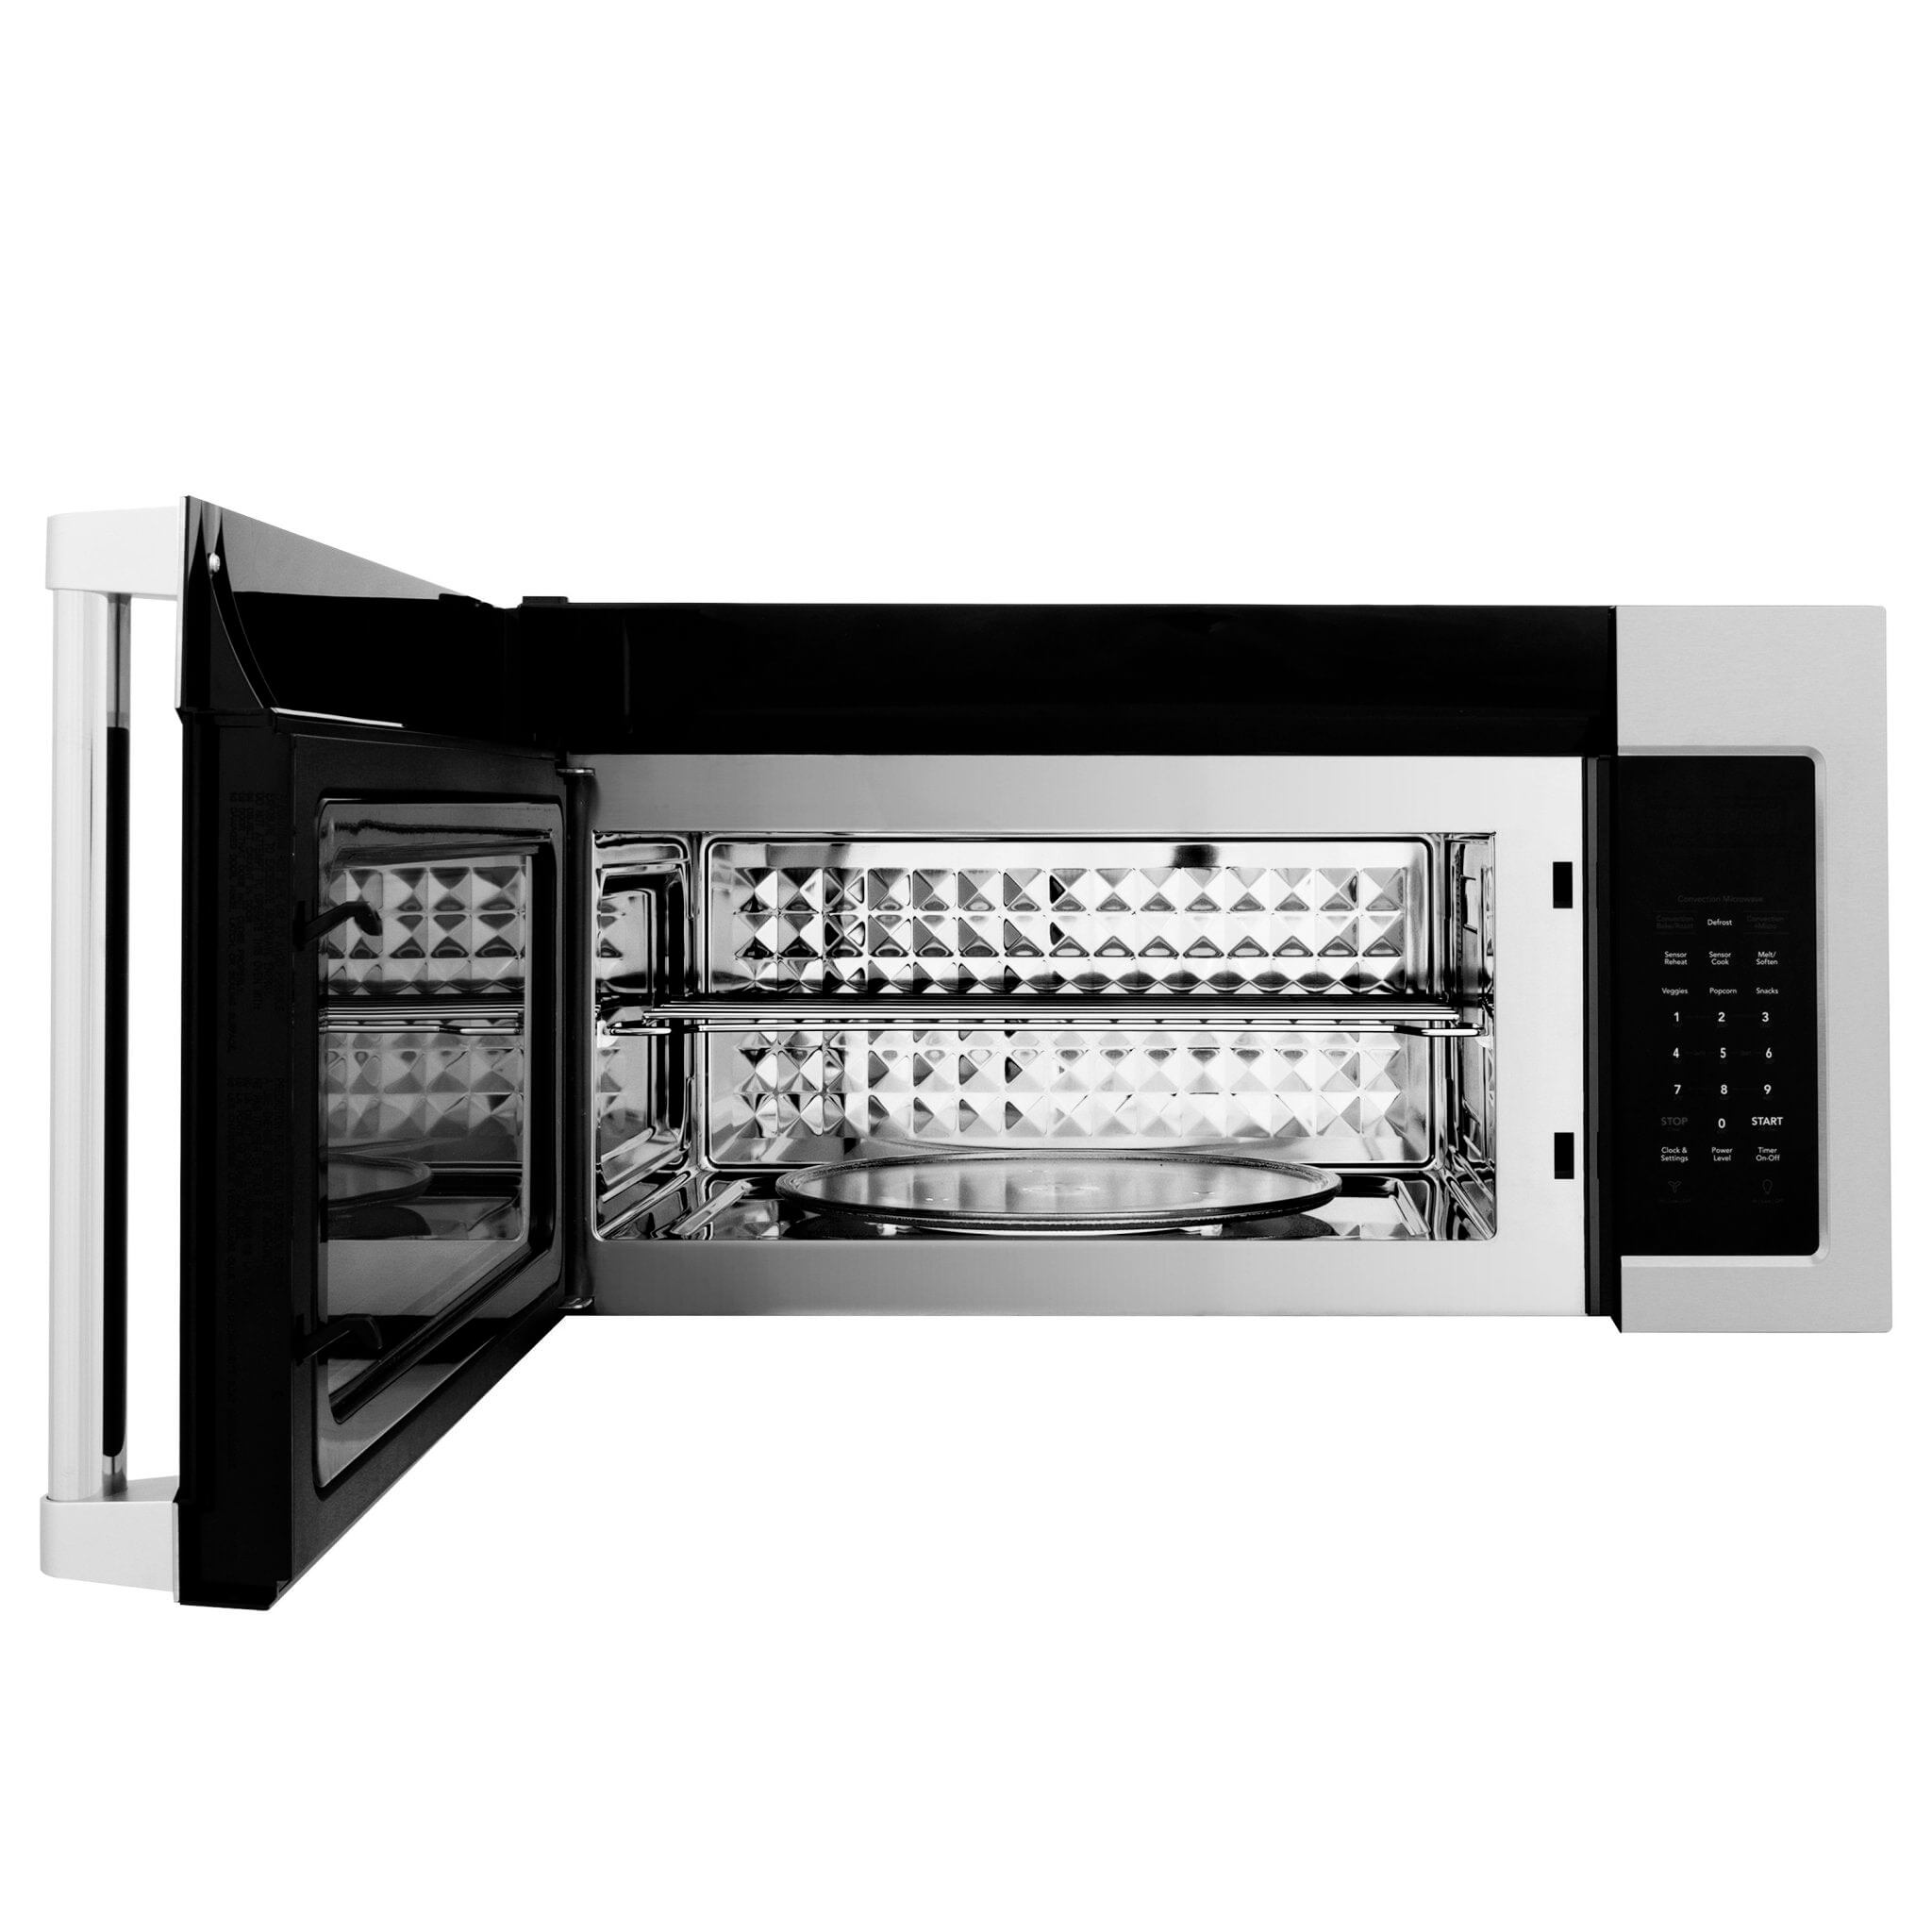 ZLINE's 30 inch over the range microwave (MWO-OTR-H-30) features a DiamondTech Interior engineered to scatter microwaves to ensure even cooking and prevent any cold spots